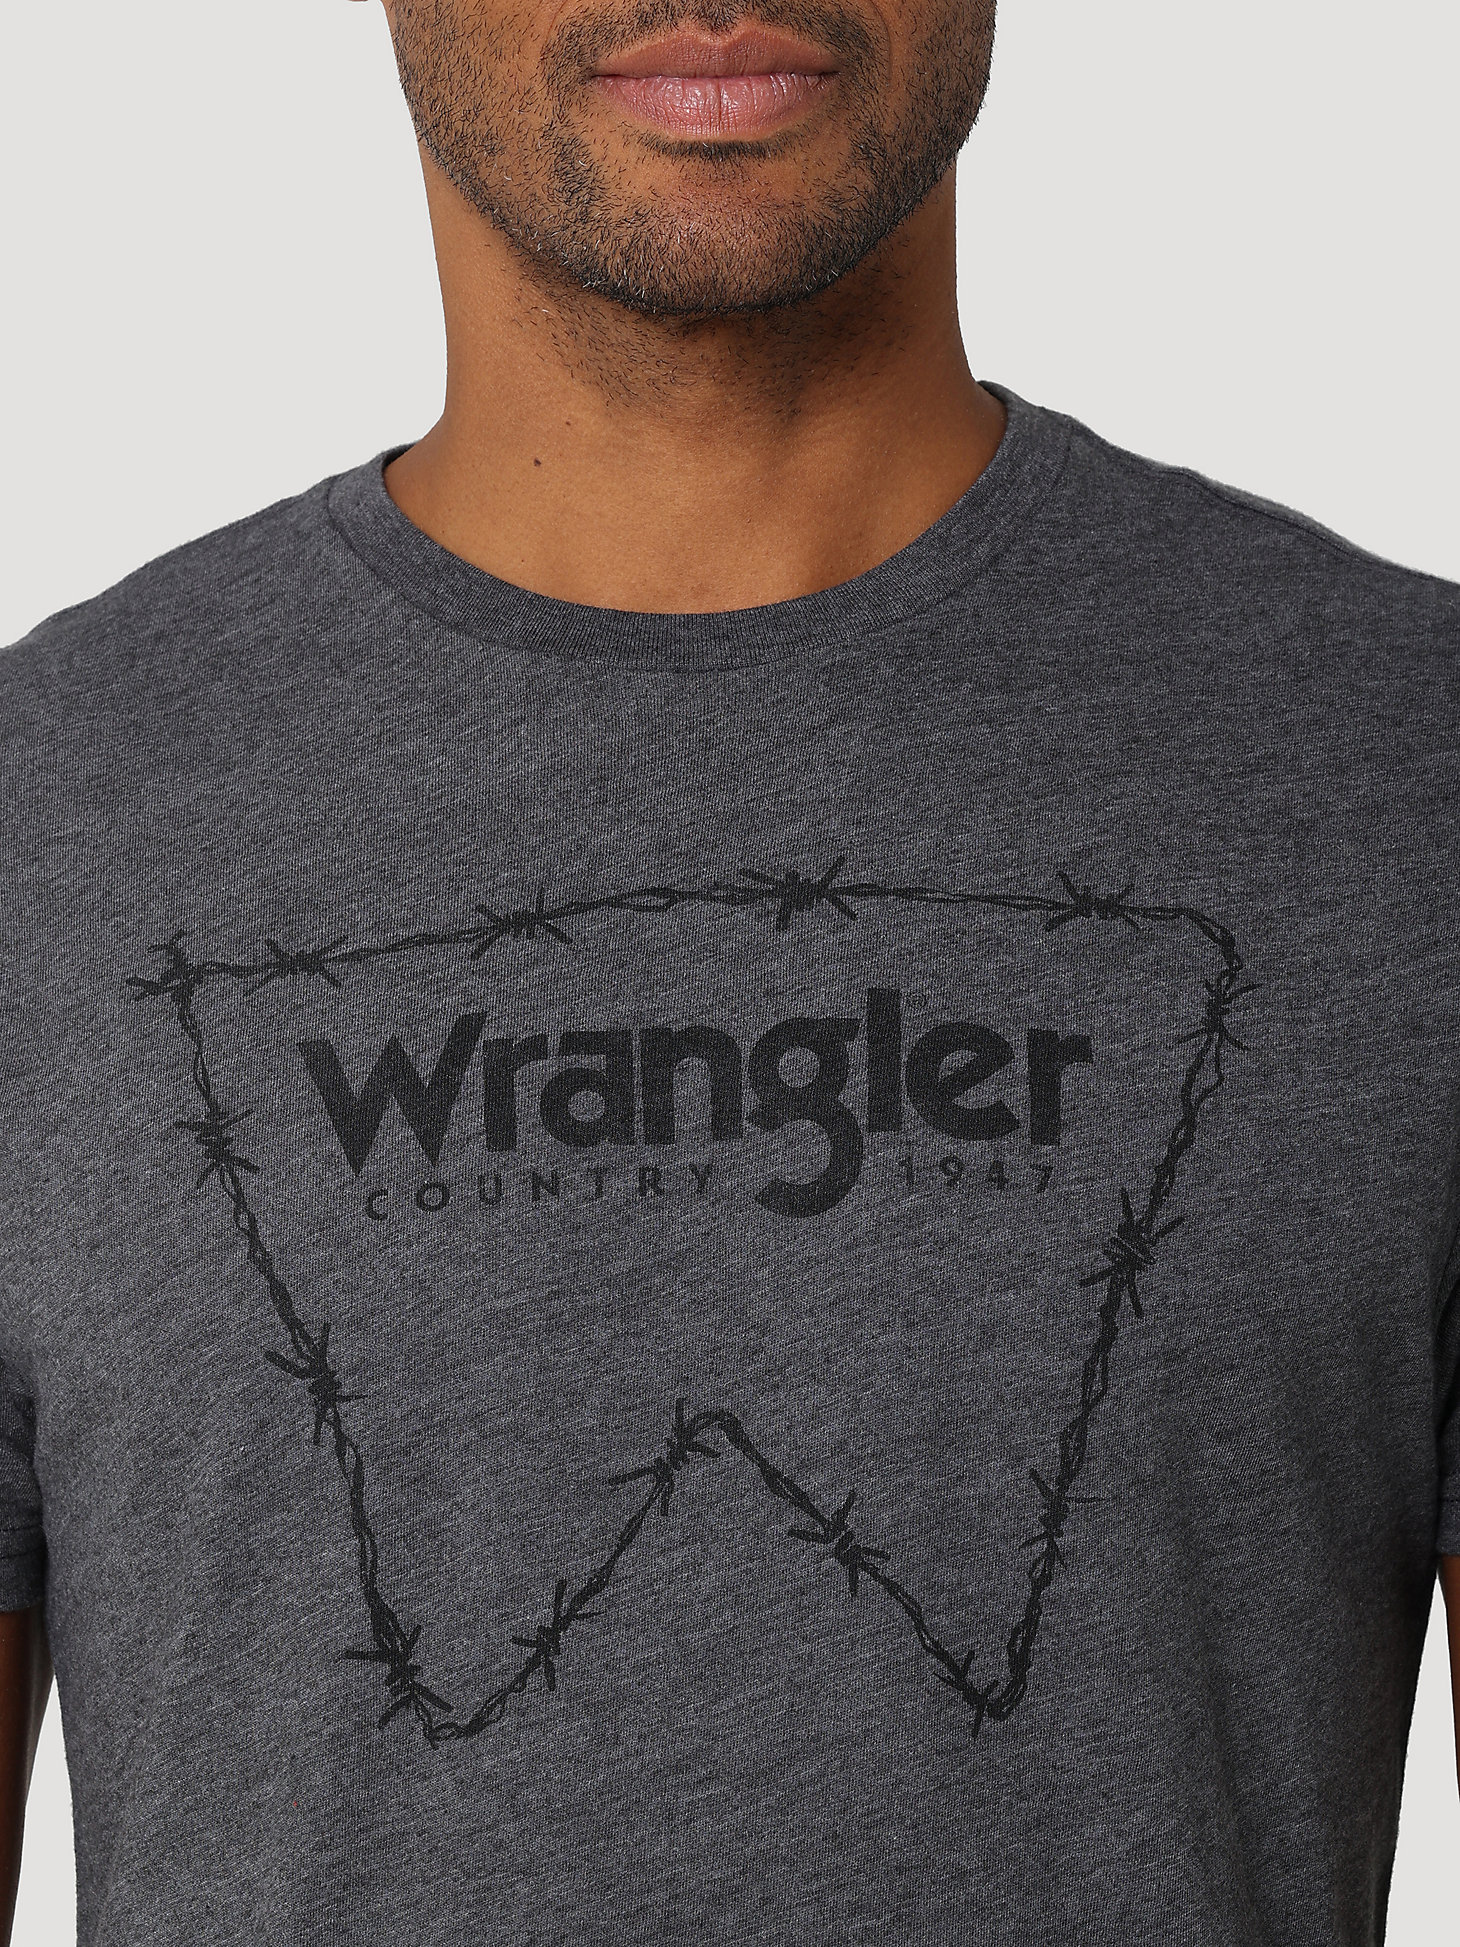 Men's Barbed Logo Graphic T-Shirt in Charcoal Heather alternative view 1